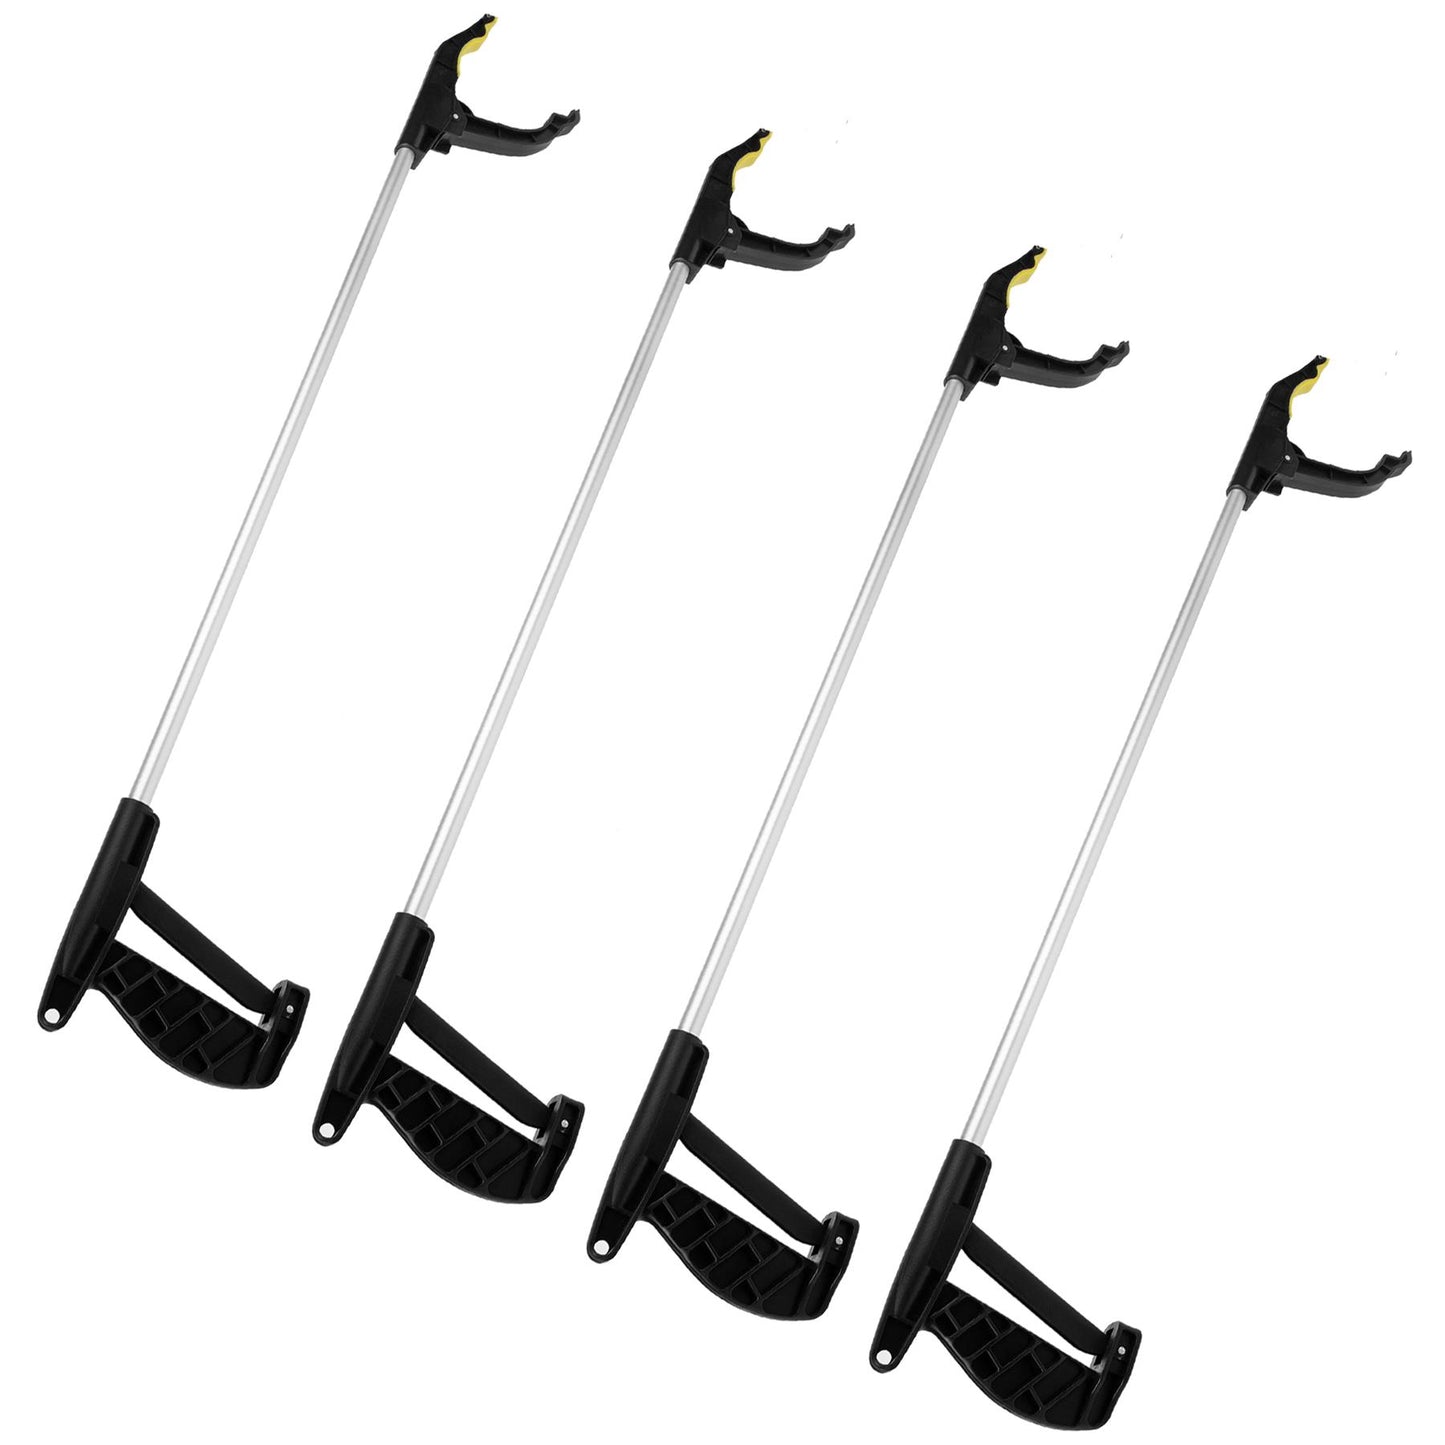 Set of 4 Grab & Grip Litter Pickers Promoting Cleanliness